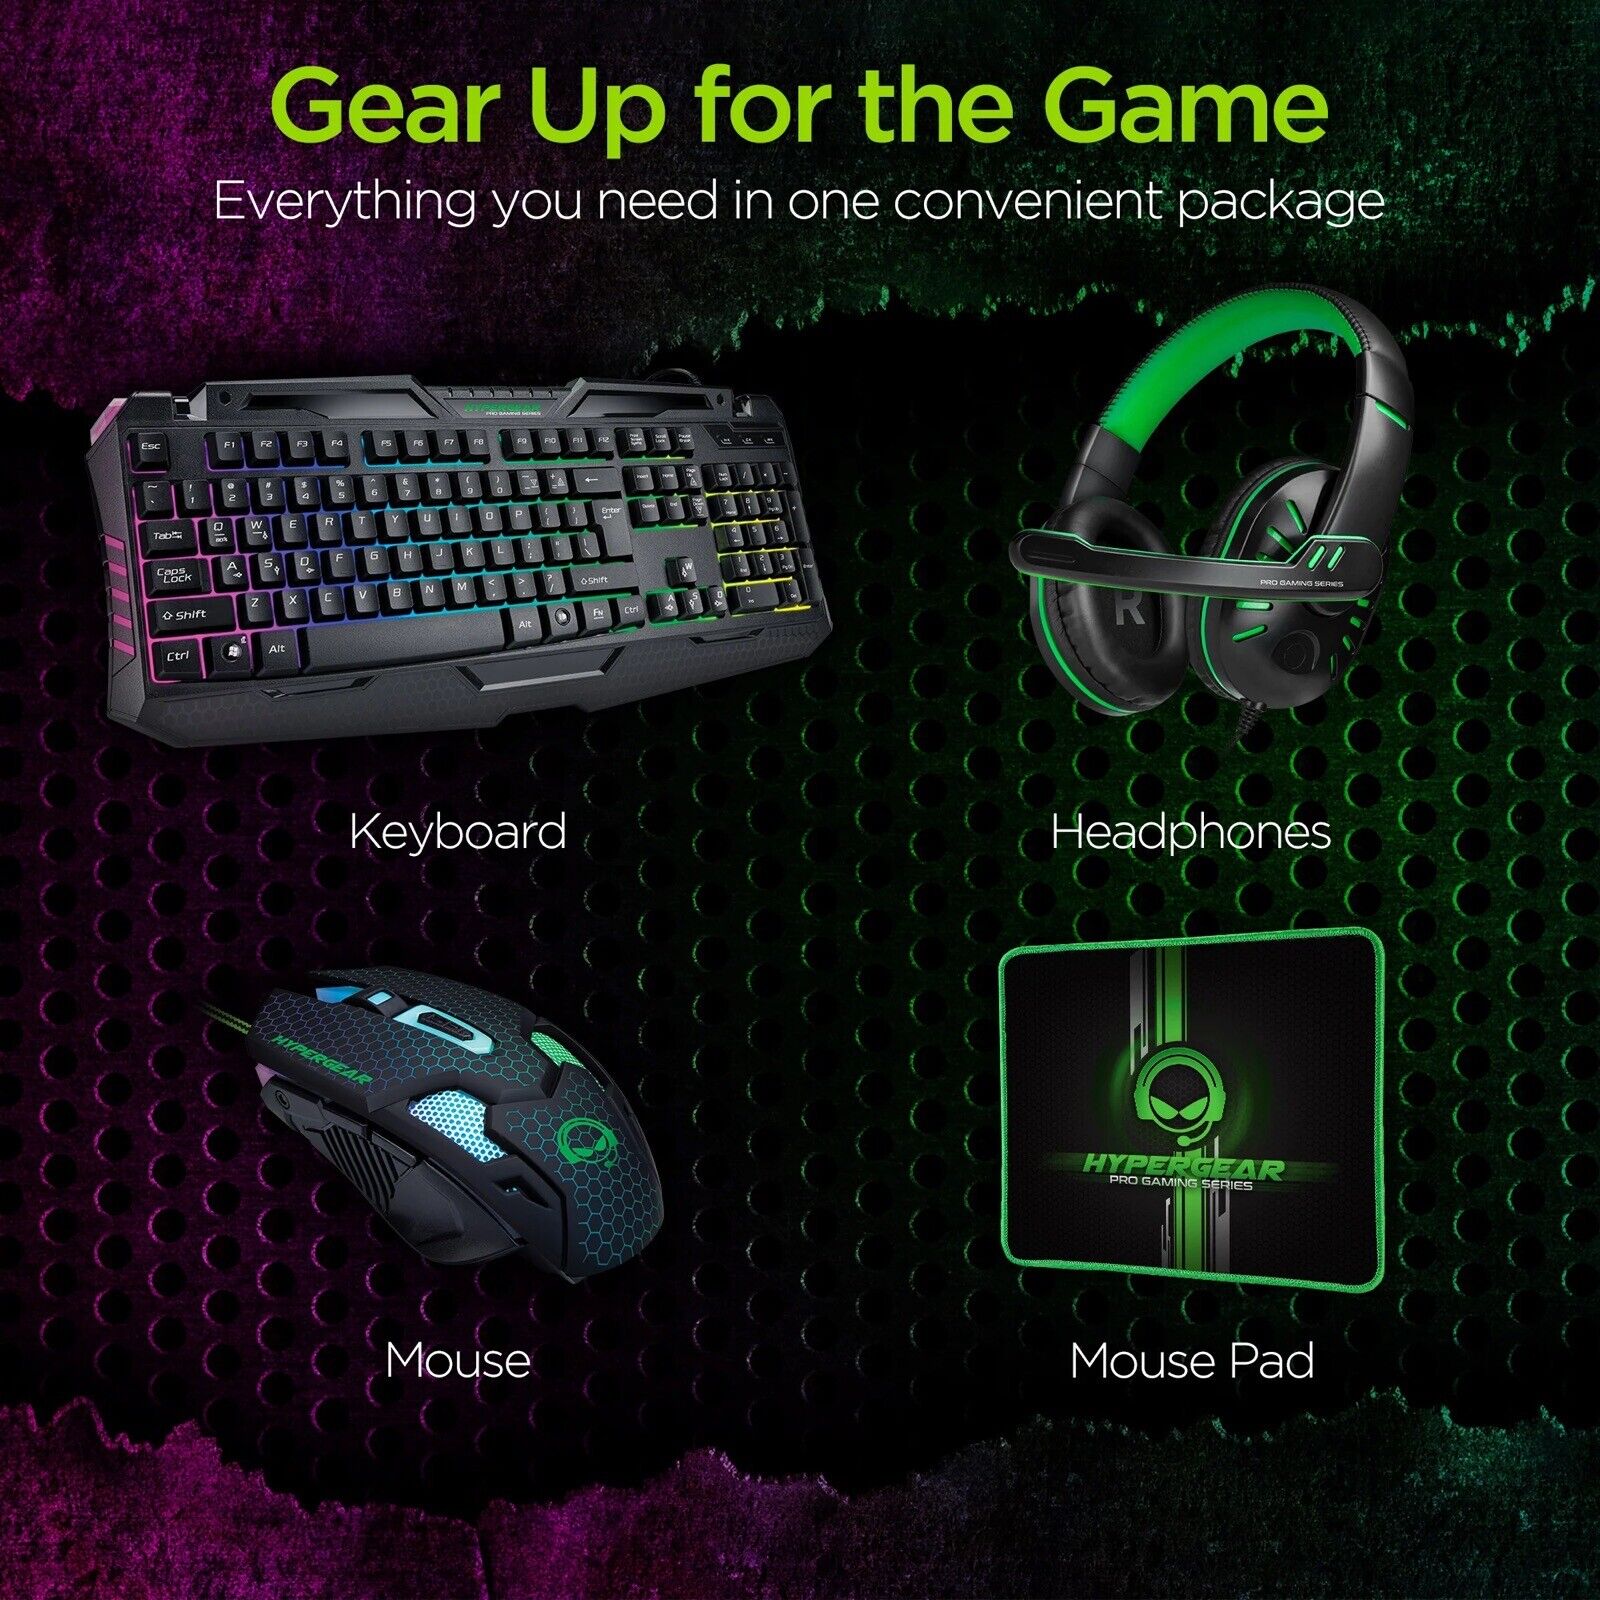 NEW HyperGear 4-in-1 Gaming Keyboard, Headphones, Mouse and pad (sealed box)